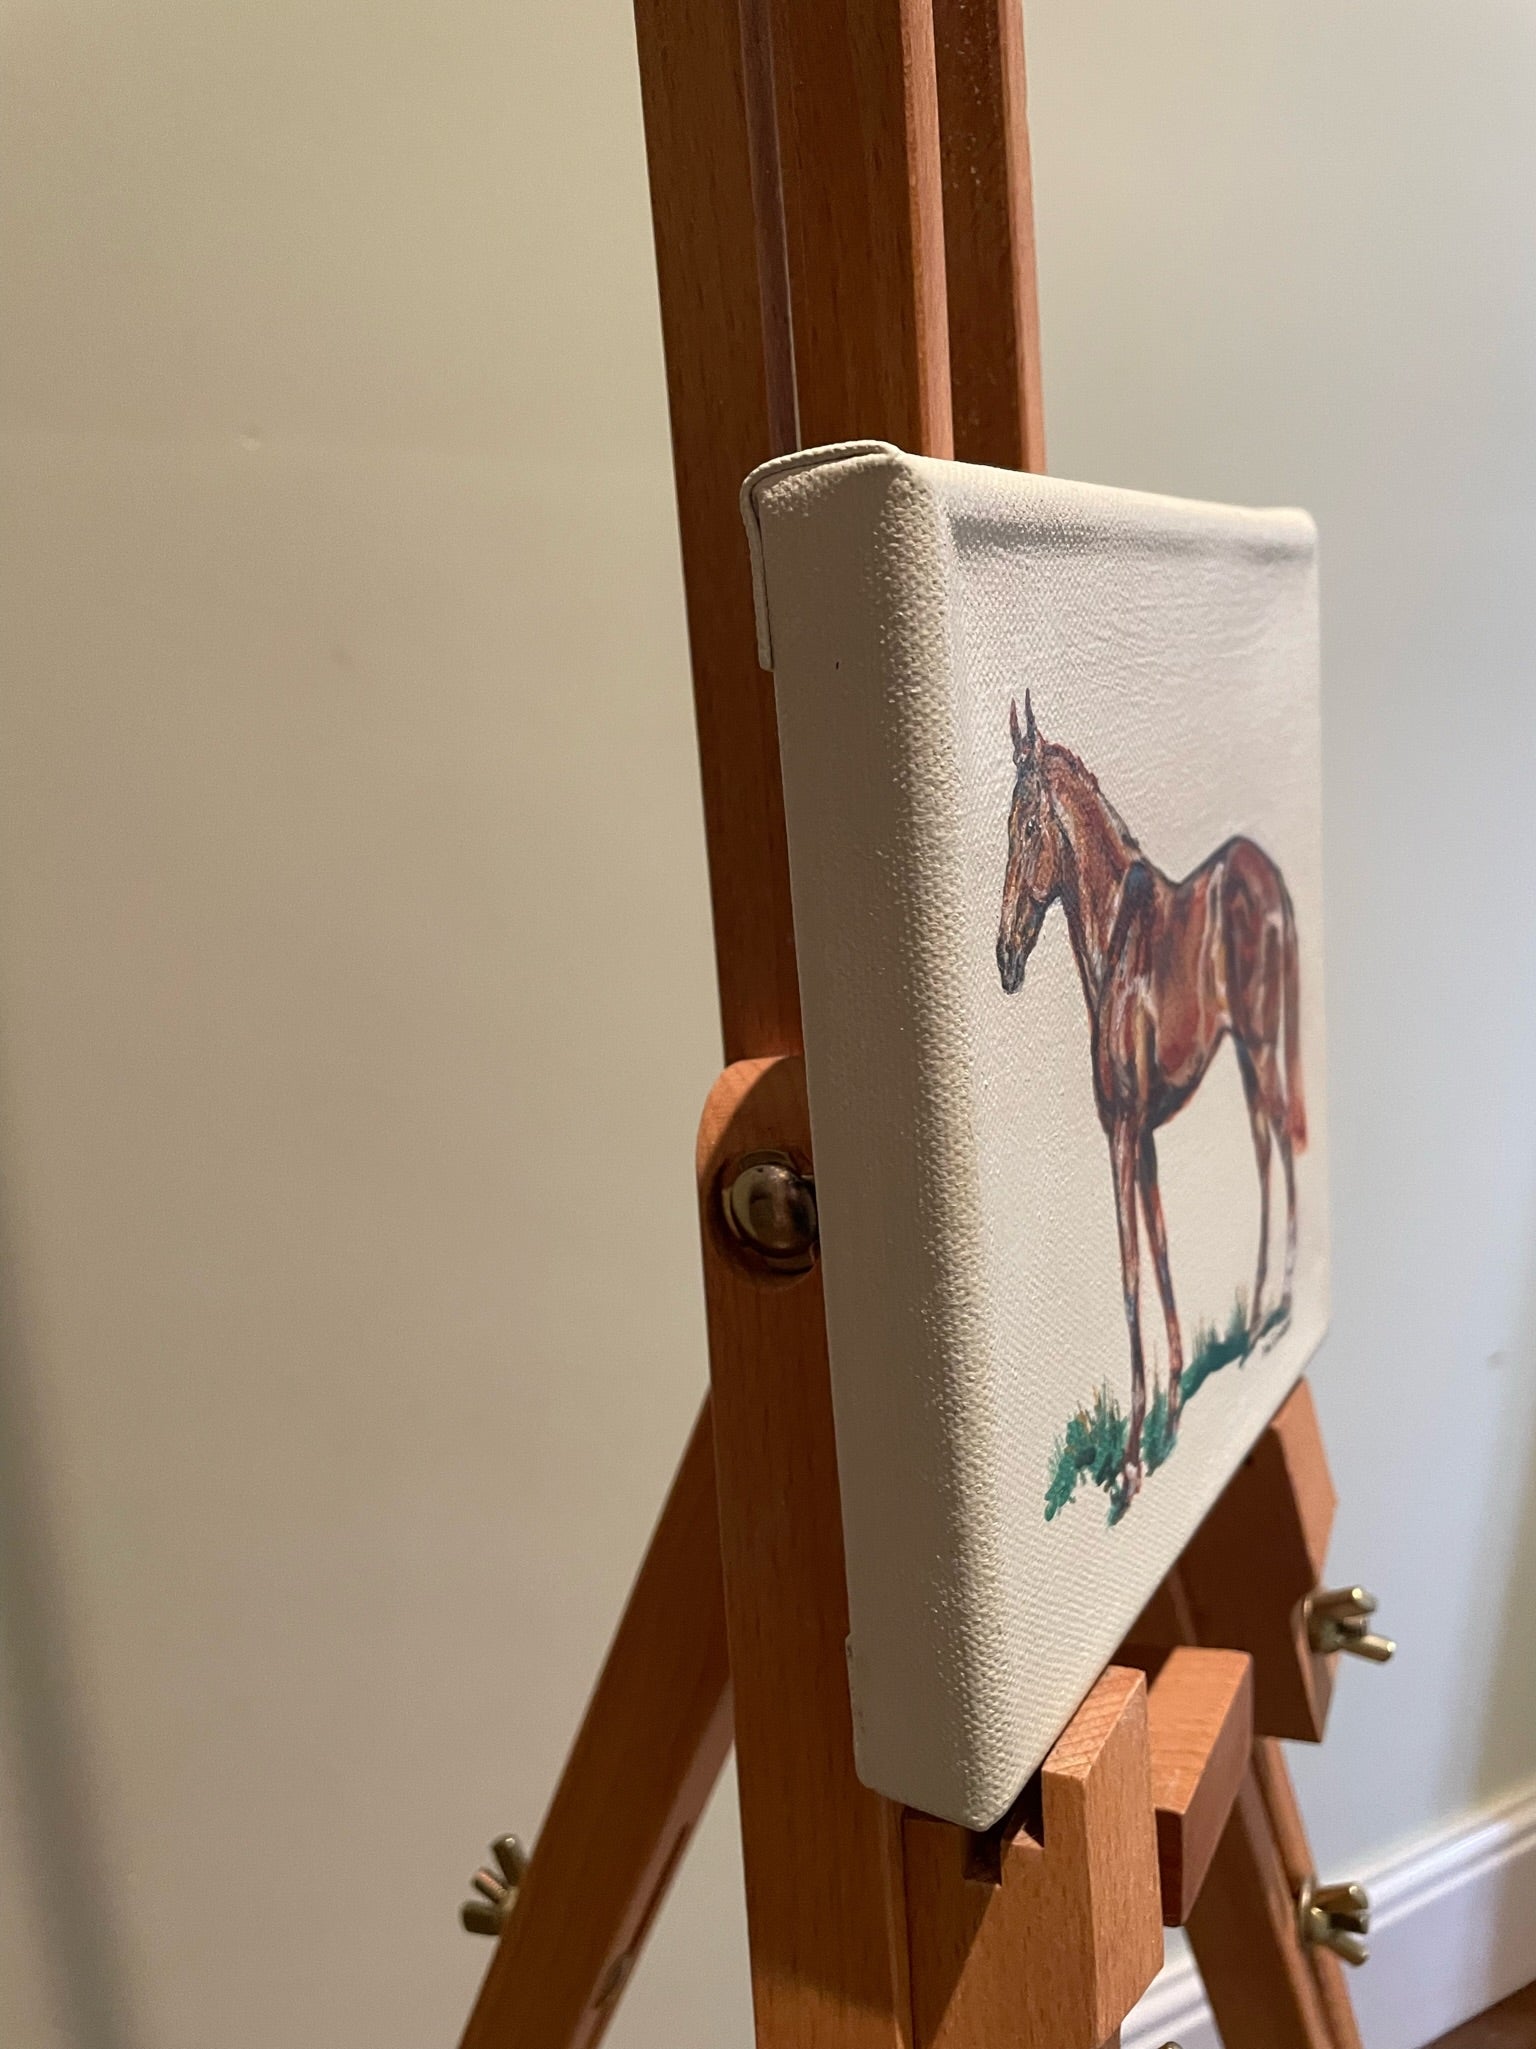 Chestnut Horse - 15cm x 15cm mini paintings depicting various countryside subjects.